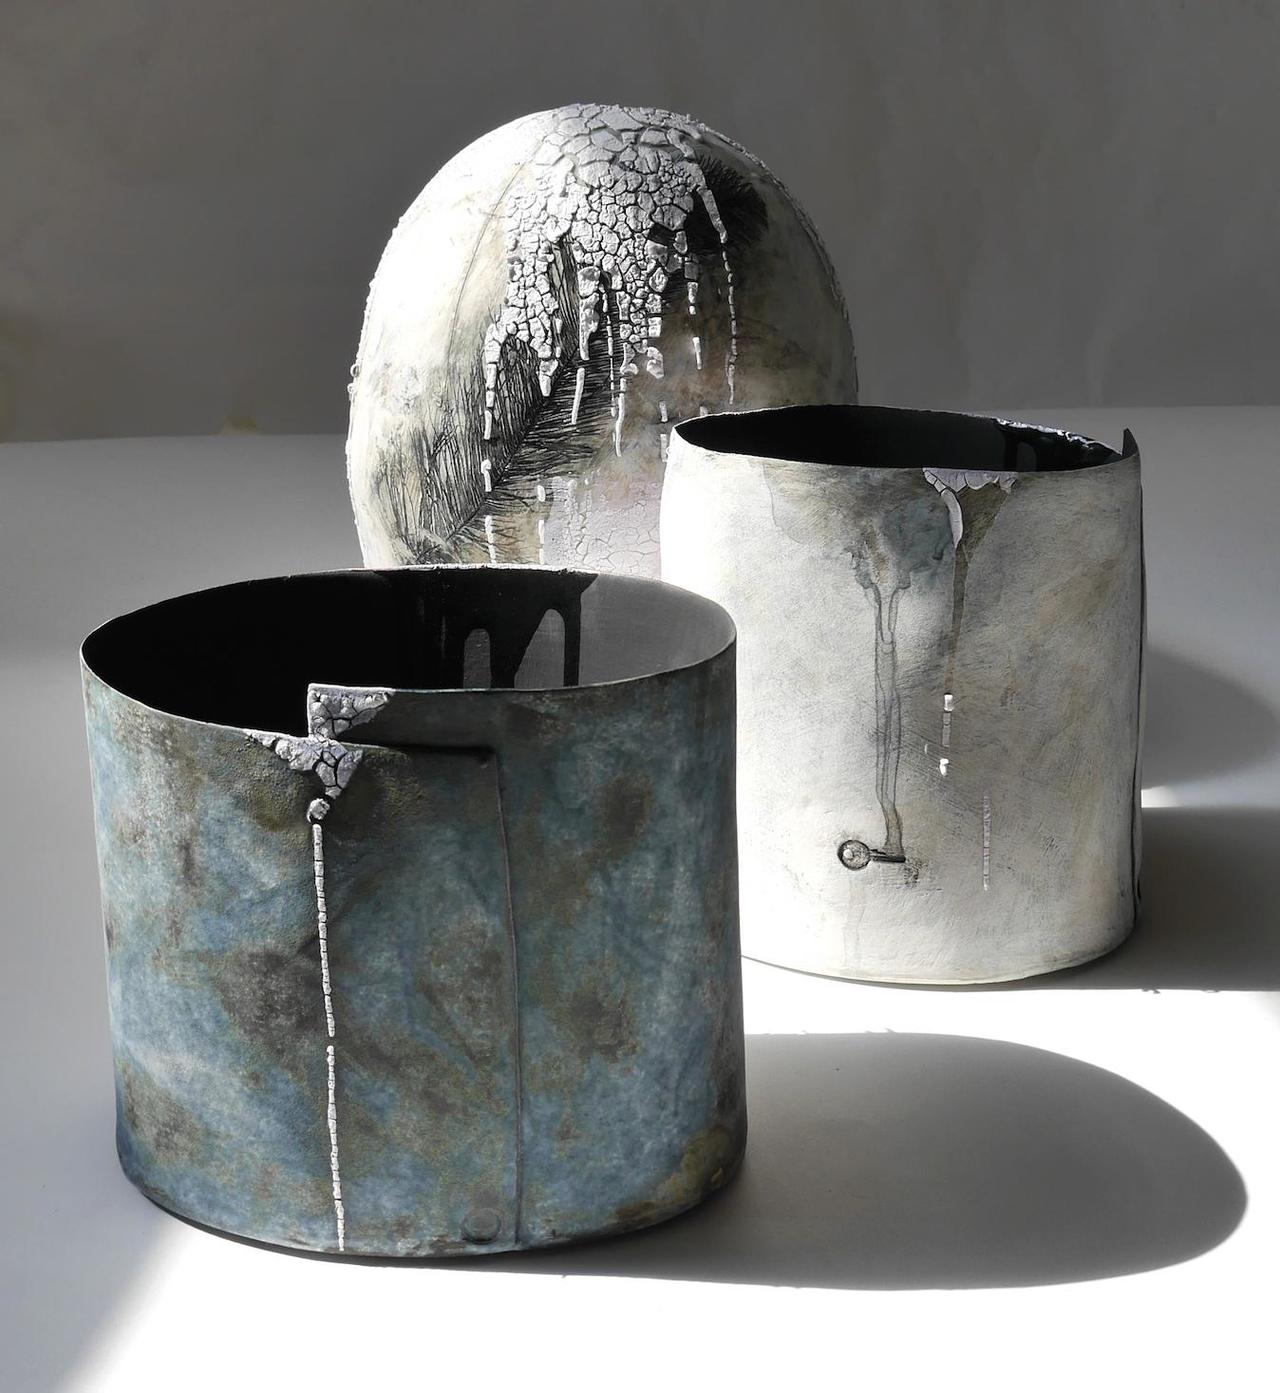 RT @hmceramics: Thanks @NewCraftsman for keeping my work in the gallery over the summer http://www.newcraftsmanstives.com #StIves #ceramics http://t.co/rFvMaUqKHh